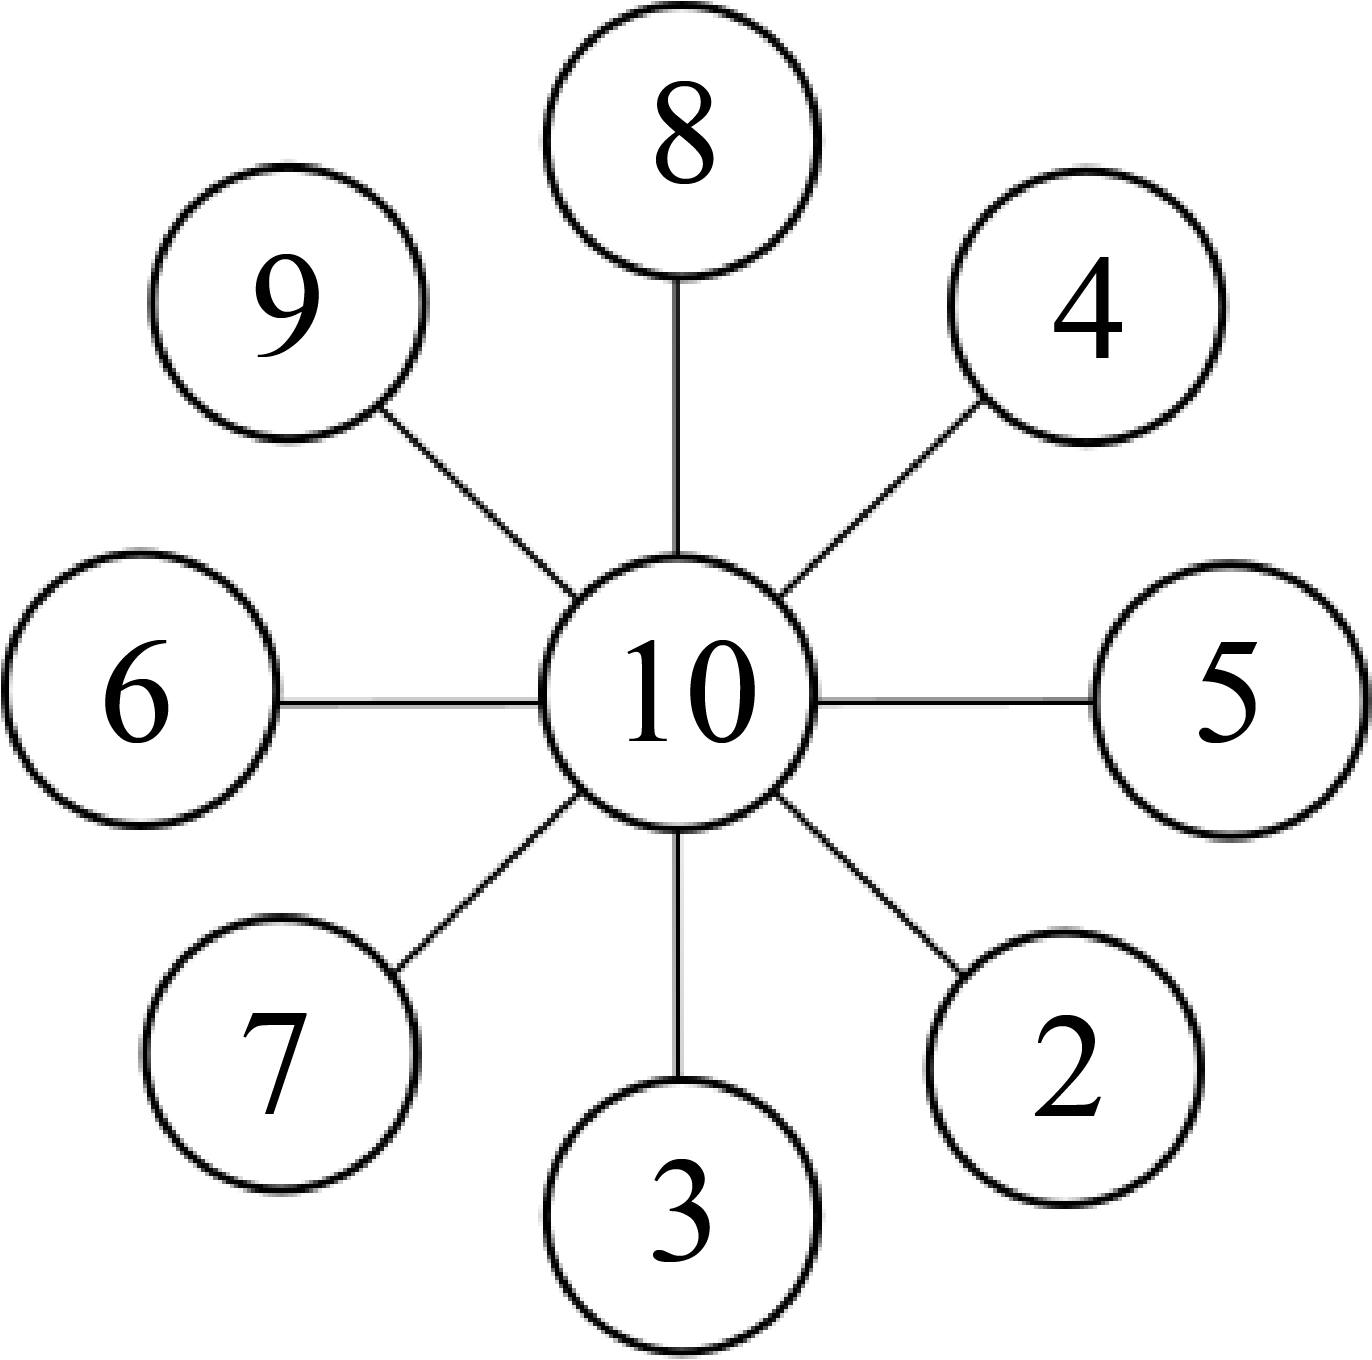 10 is the middle number. The pairs of numbers placed on the same line are 2 and 9, 3 and 8, 4 and 7, 5 and 6.